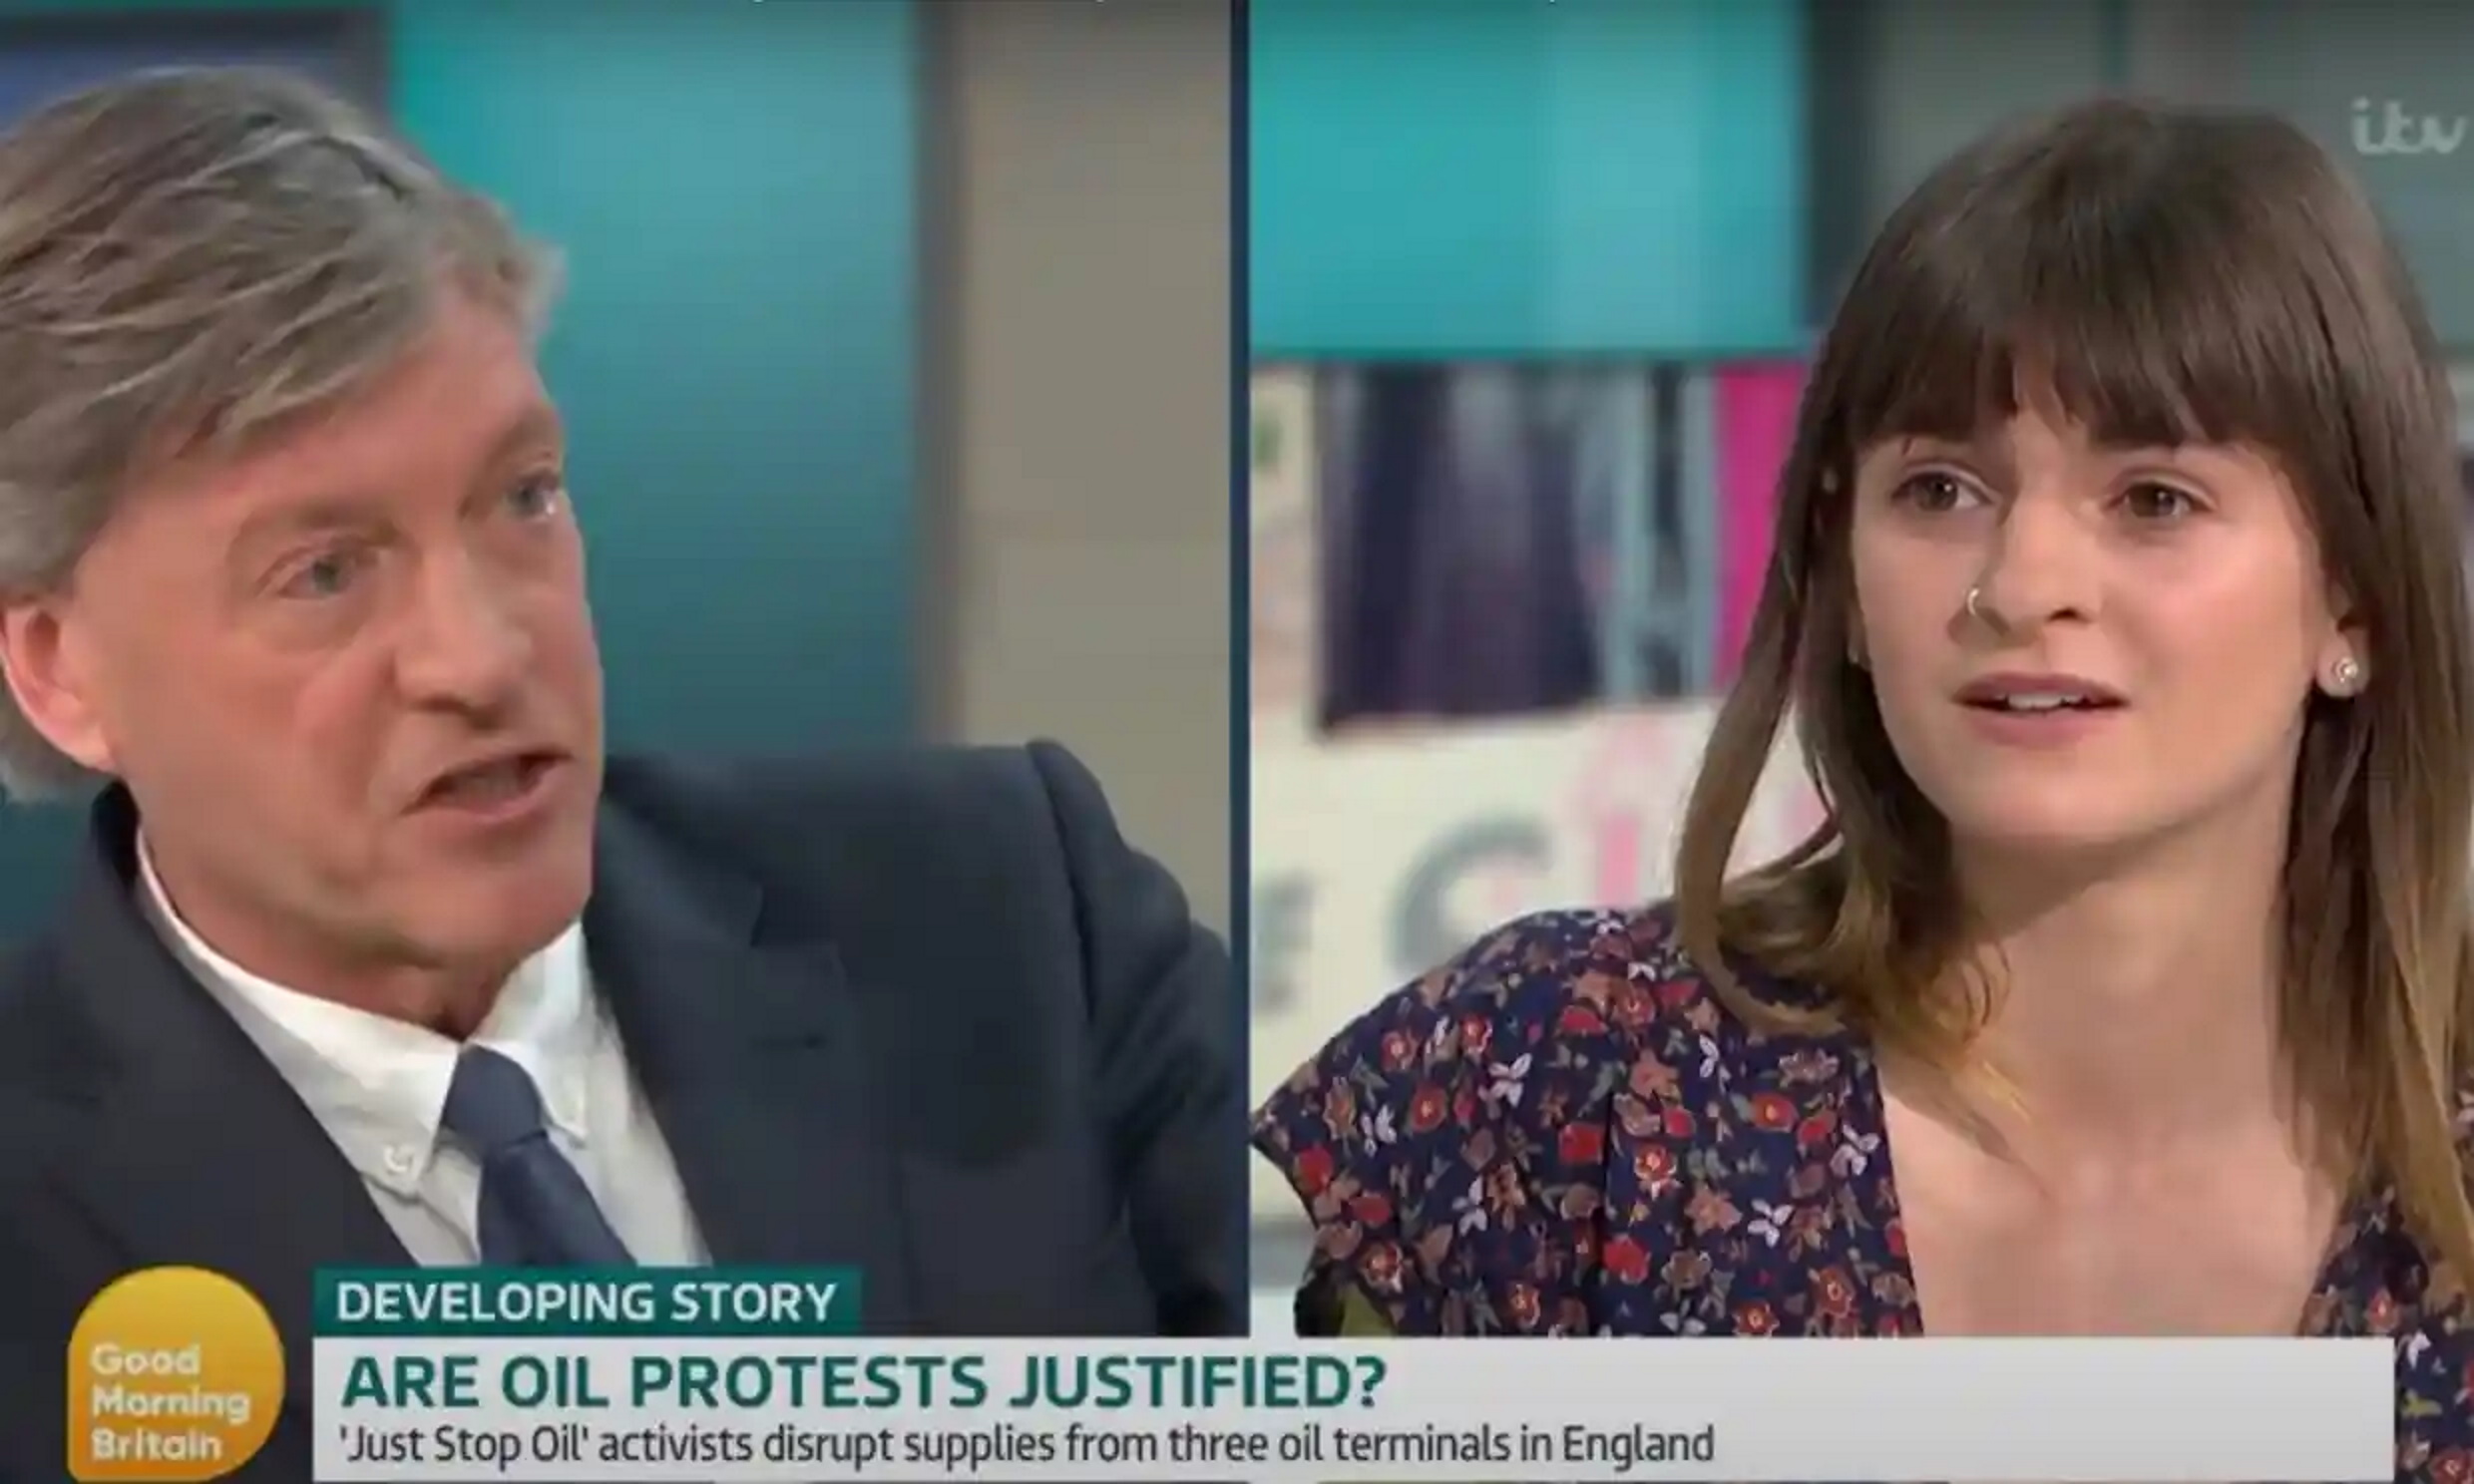 ITV Host Richard Madeley and student activist Miranda Whelehan on “Good Morning Britain” on Monday, 11 April 2022. Whelehan was there on behalf of “Just Stop Oil”, an activist group that has been engaging in direct action by blockading oil terminals and demanding that the UK government ends all new oil licenses, exploration, and consent in the North Sea. Madeley, the host, criticized the group by saying, “But you’d accept, wouldn’t you, that it’s a very complicated discussion to be had, it’s a very complicated thing. And this ‘Just Stop Oil’ slogan is very playground-ish isn’t it? It’s very Vicky Pollard, quite childish.” Observers were quick to point out the parallels with the film “Don’t Look Up”. Photo: ITV